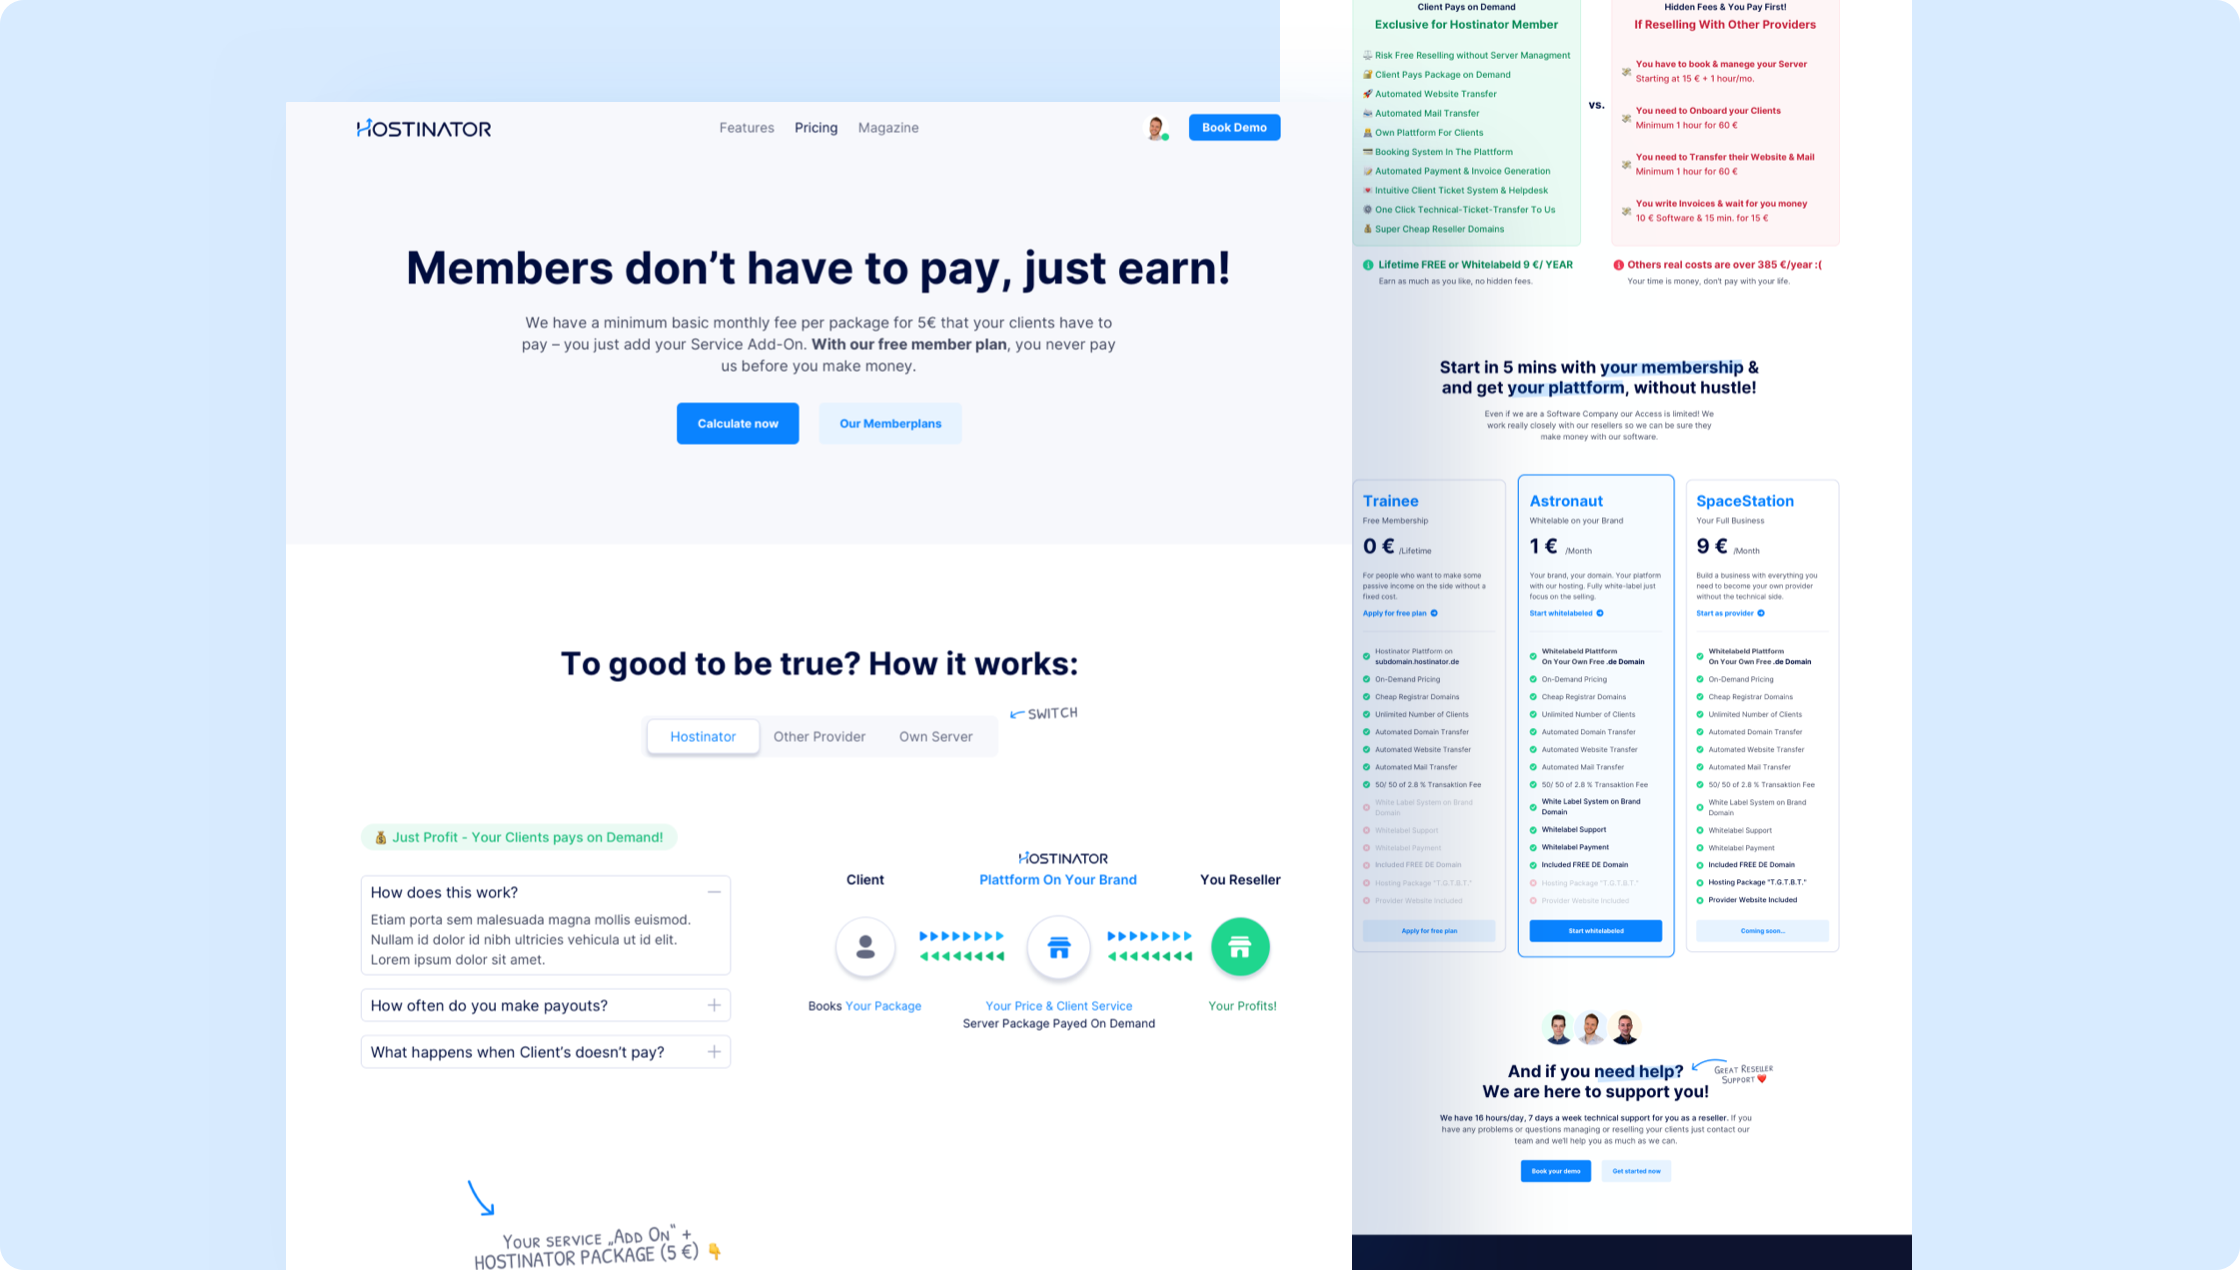 The pricing page of Hostinator